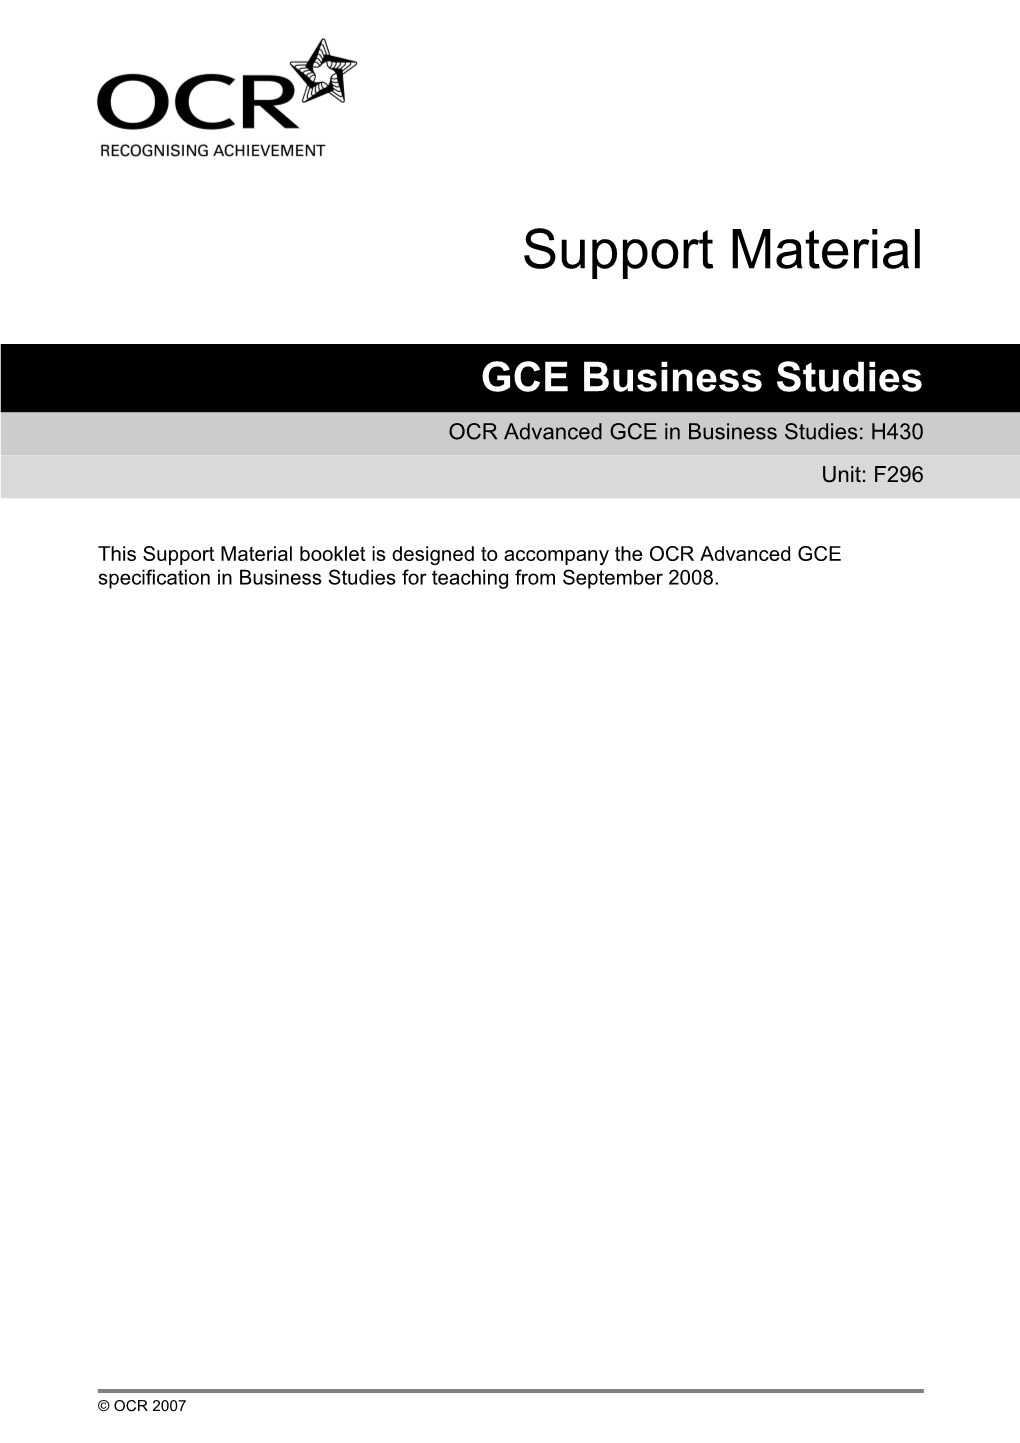 OCR Advanced GCE in Business Studies: H430